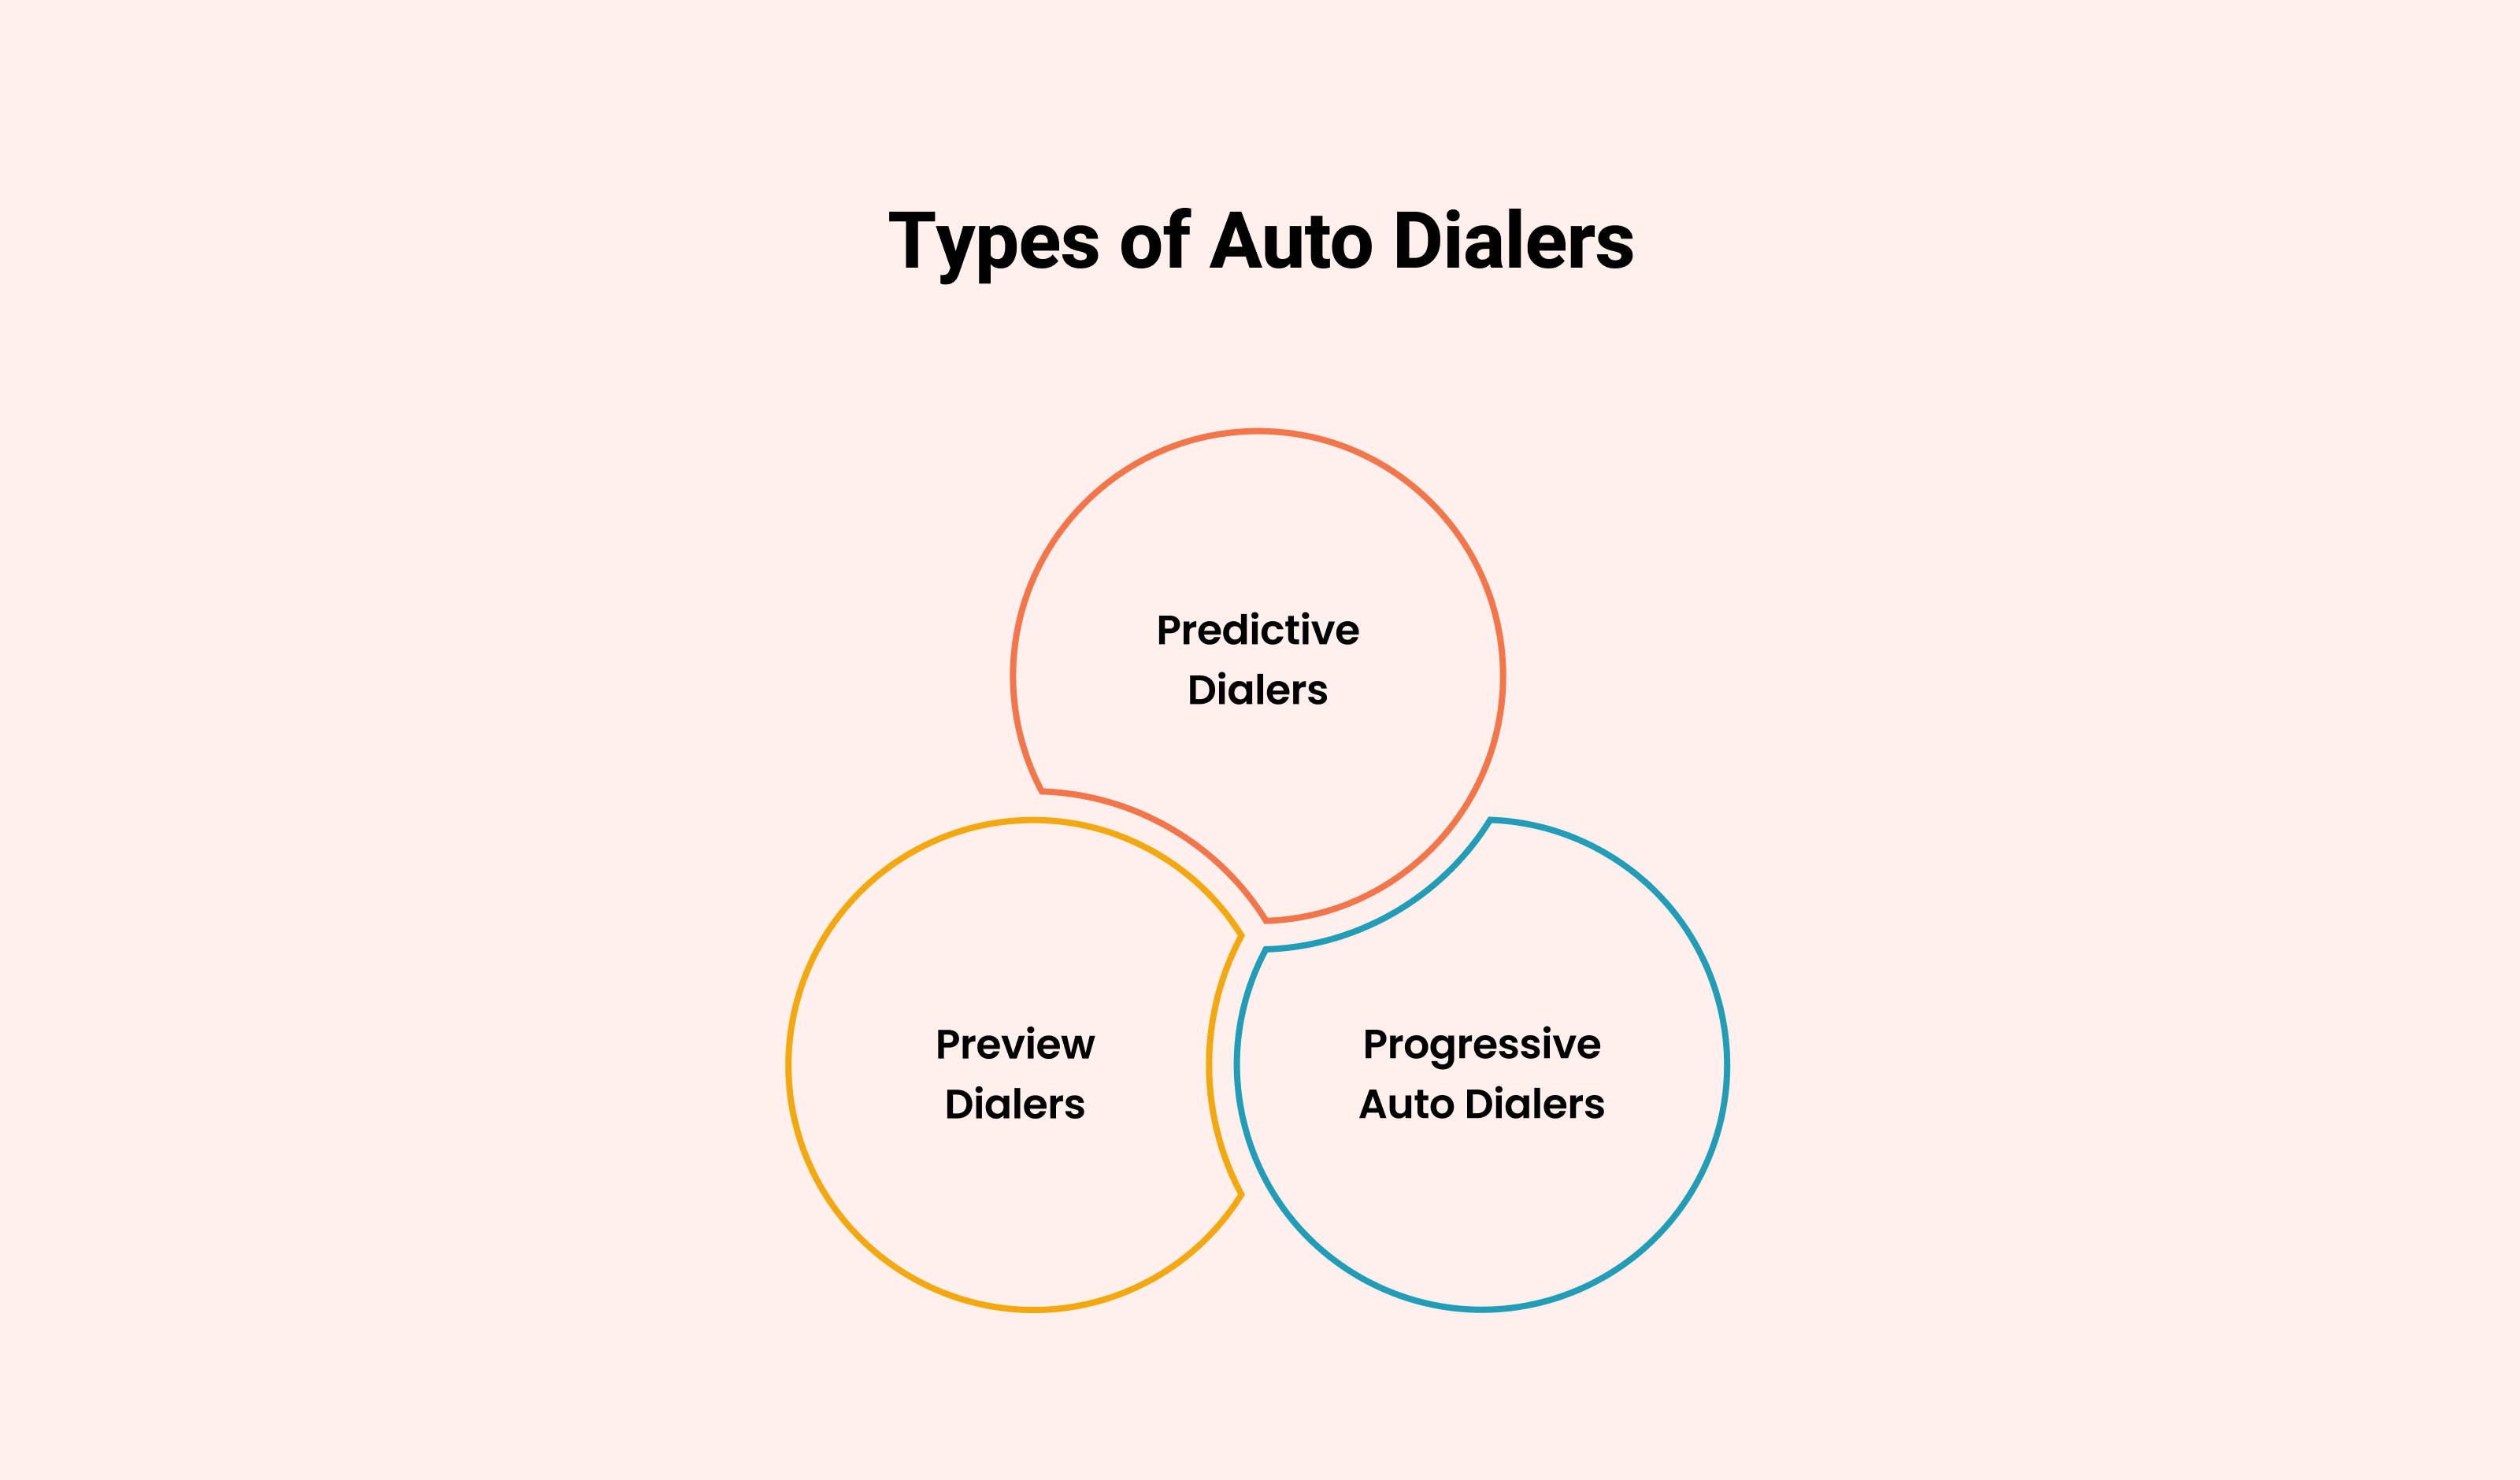 Types of Auto Dialers: